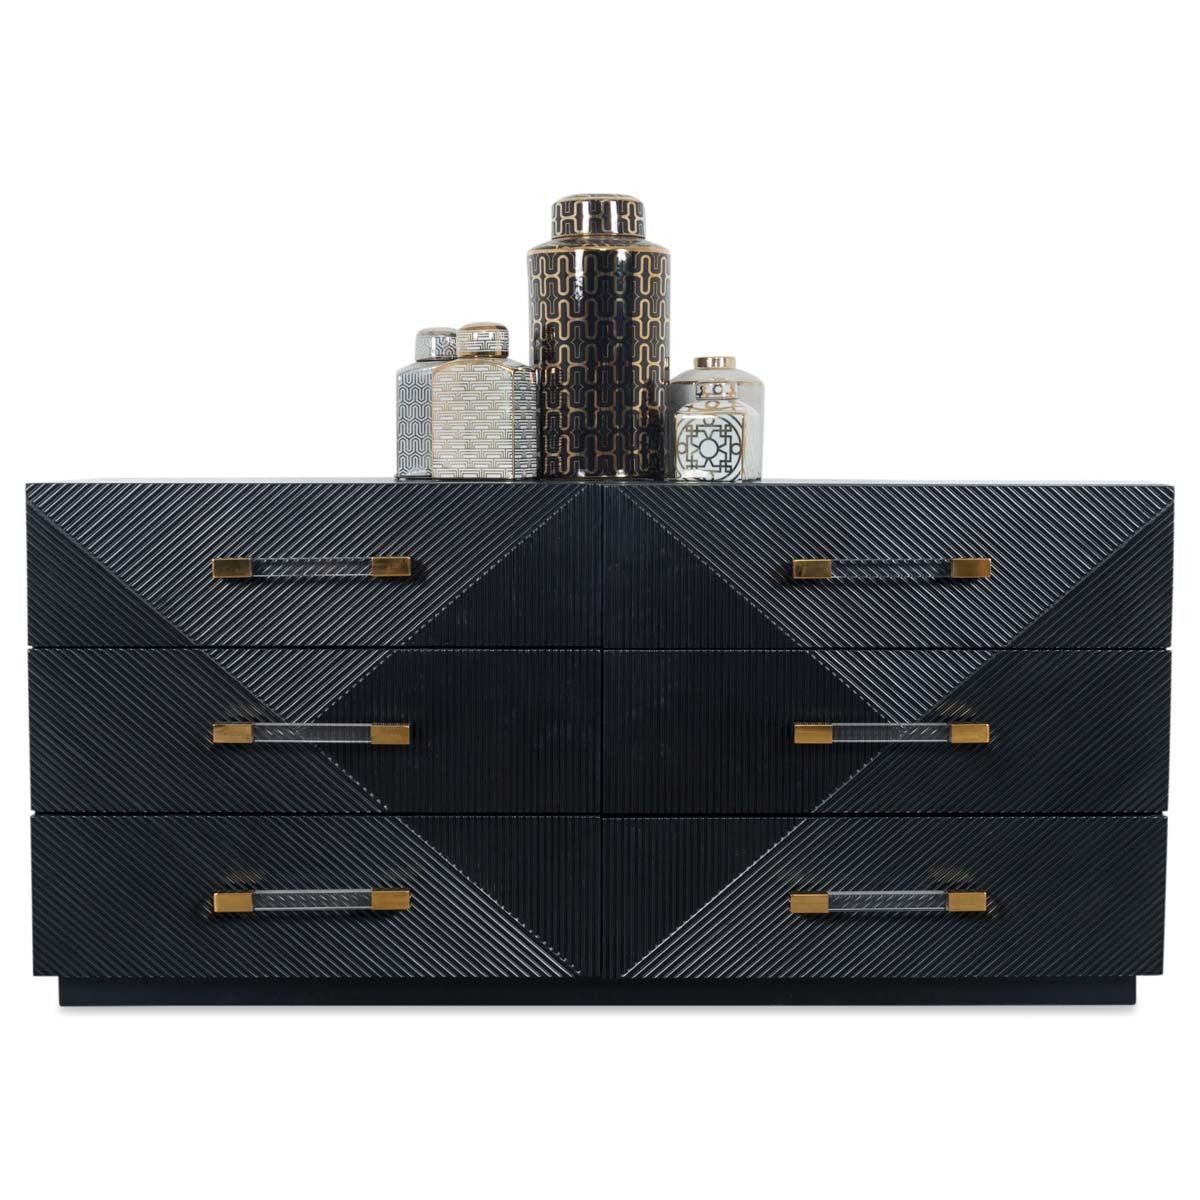 Six-drawer dresser with a black finish, textured front panels, black pedestal base and combination brass and Lucite drawer pulls.